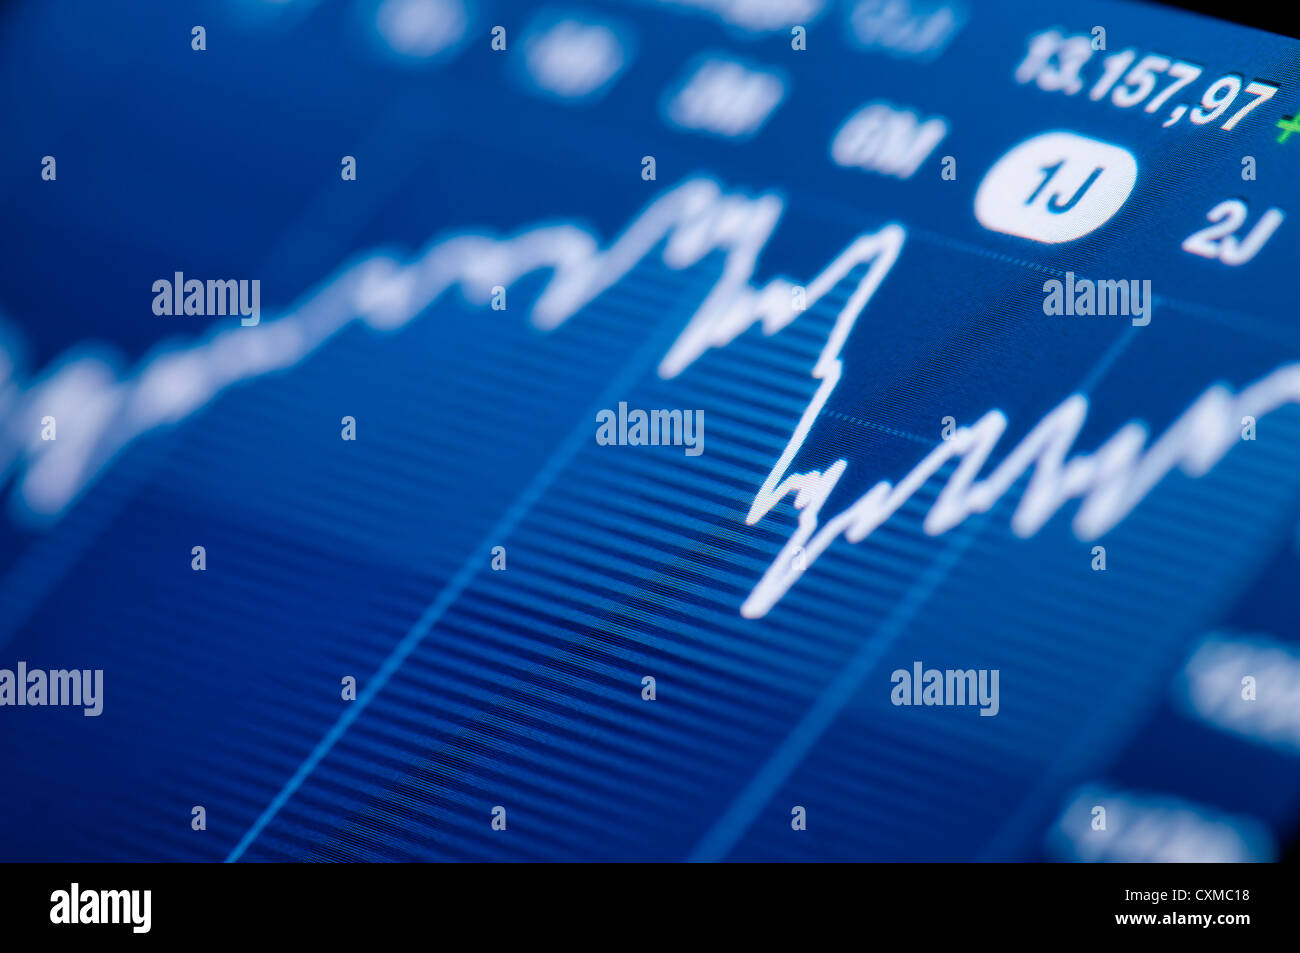 Close-up of a stock market graph on a high resolution LCD screen. Stock Photo